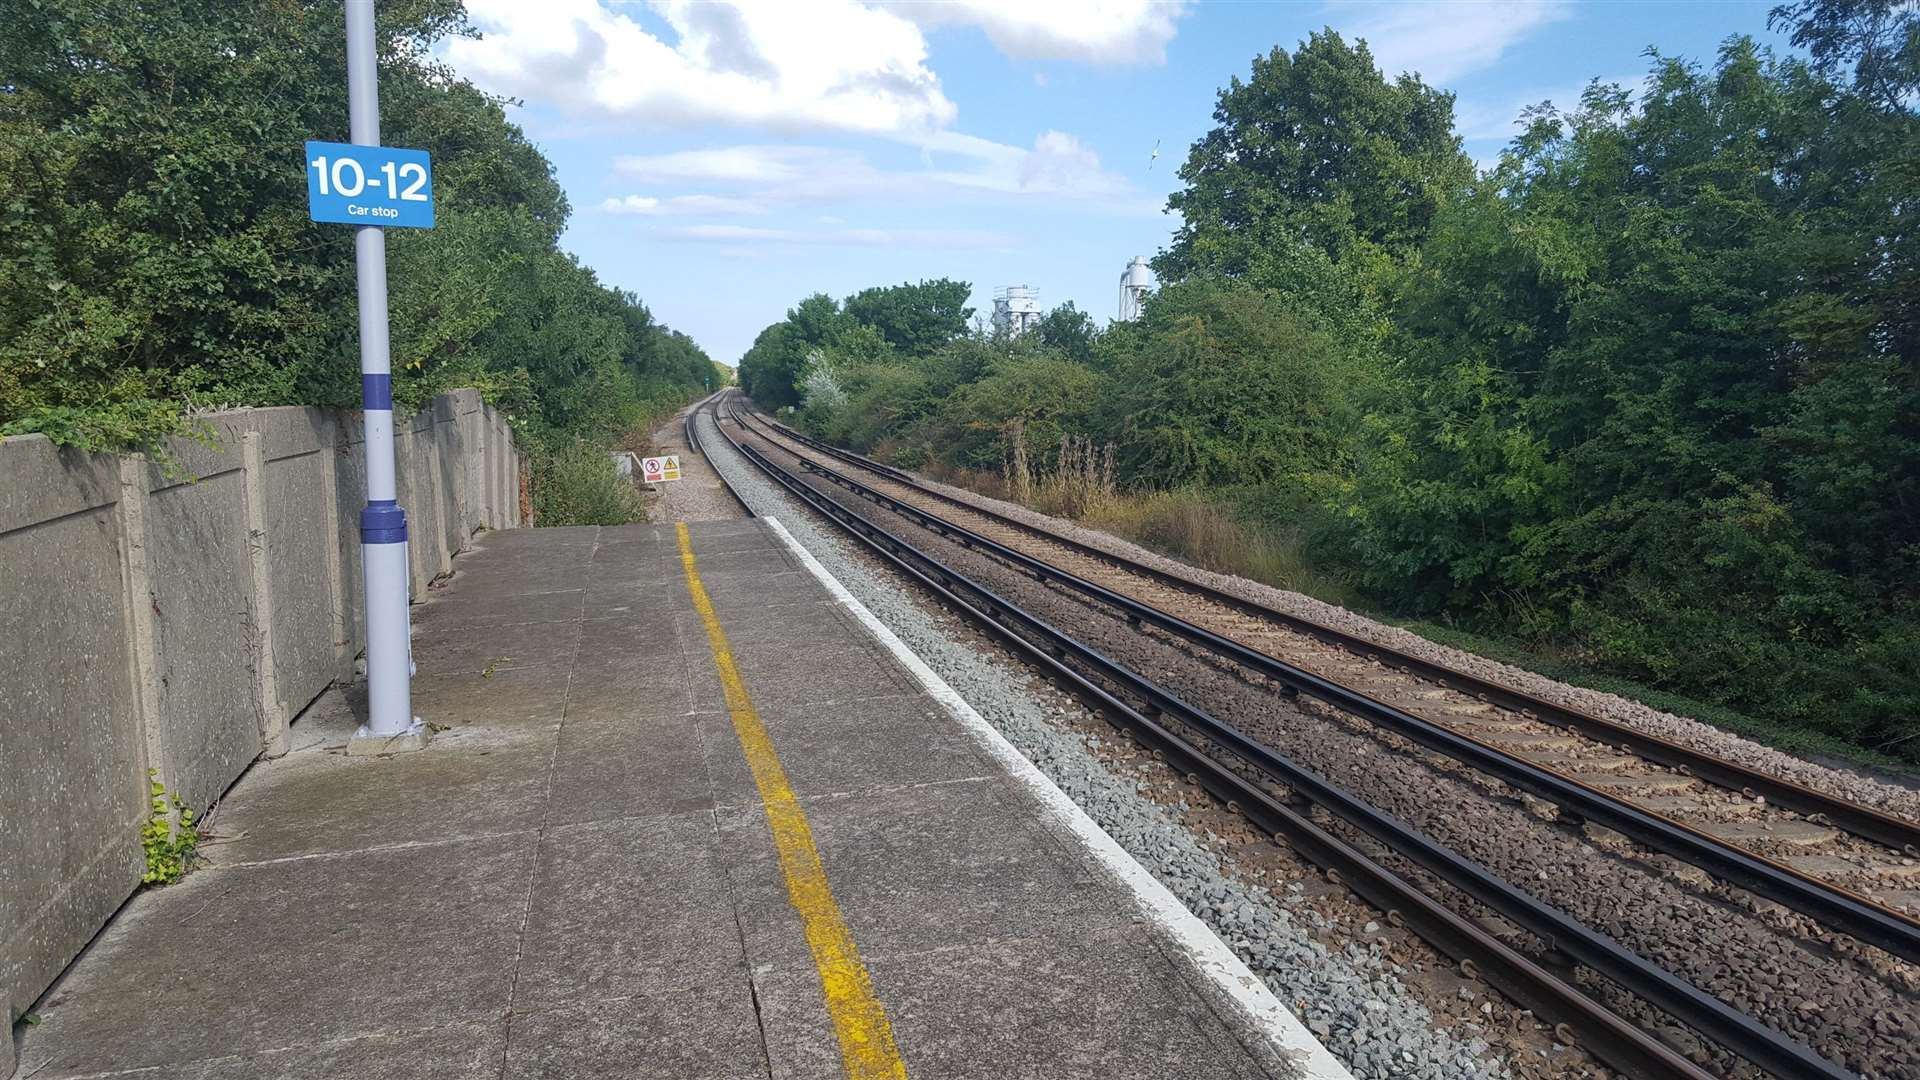 Taiyah died on the tracks at Herne Bay railway station